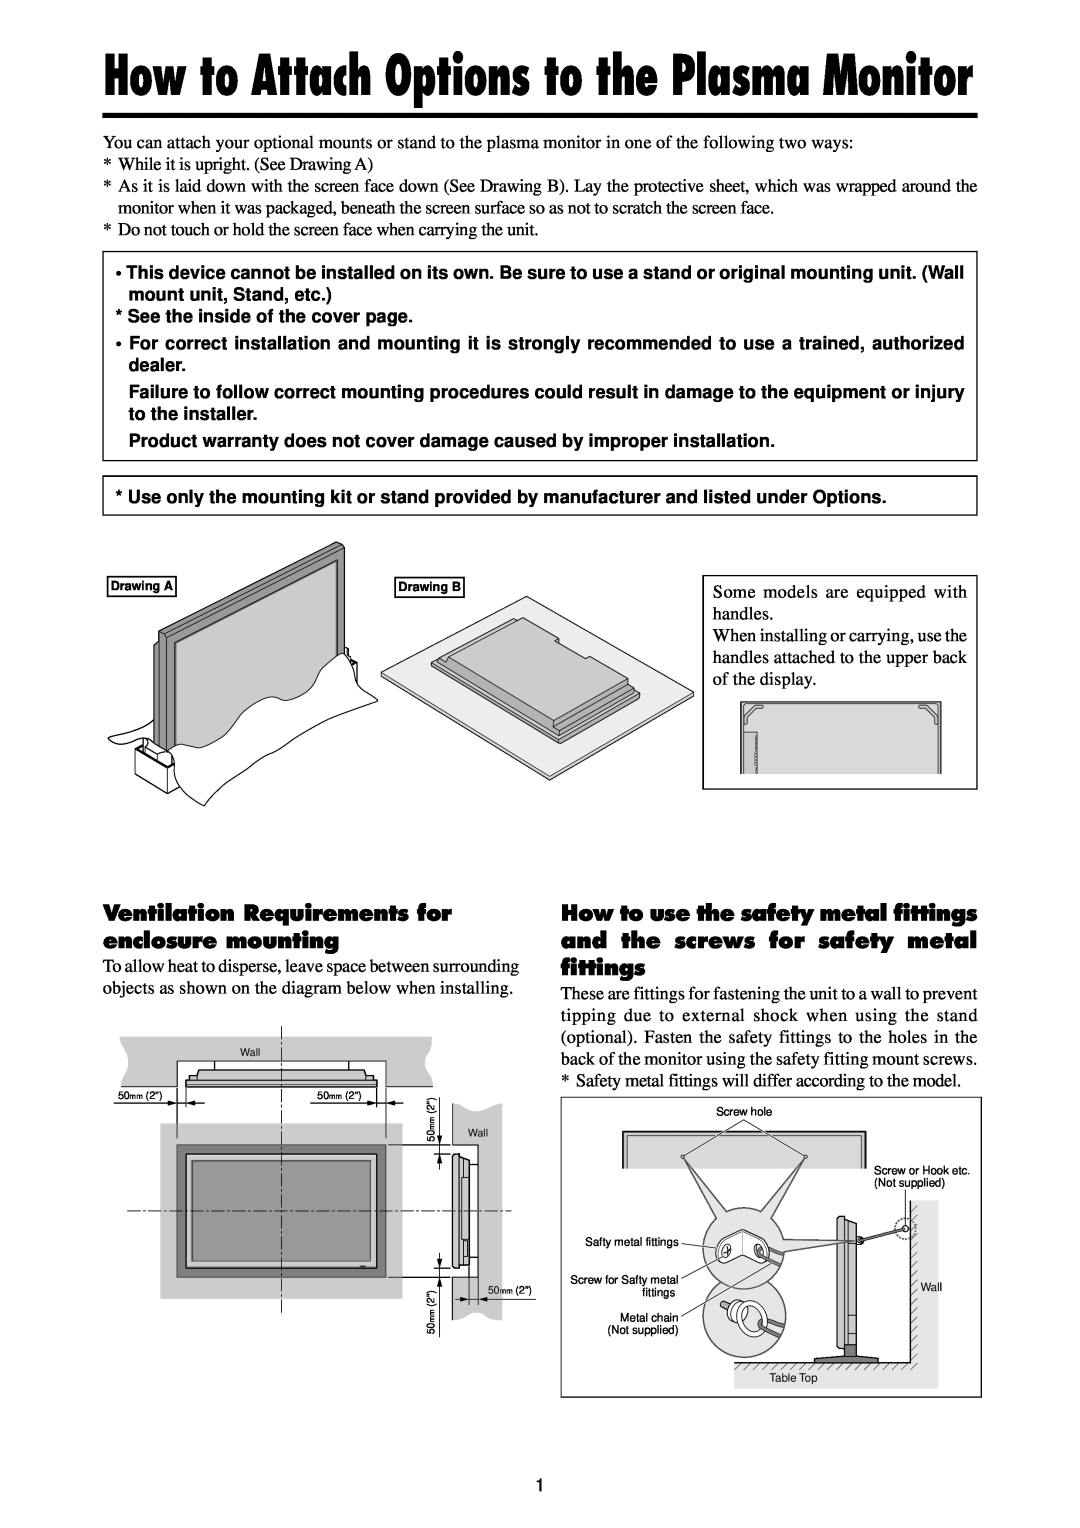 Marantz PD6140D manual Ventilation Requirements for enclosure mounting, See the inside of the cover page 